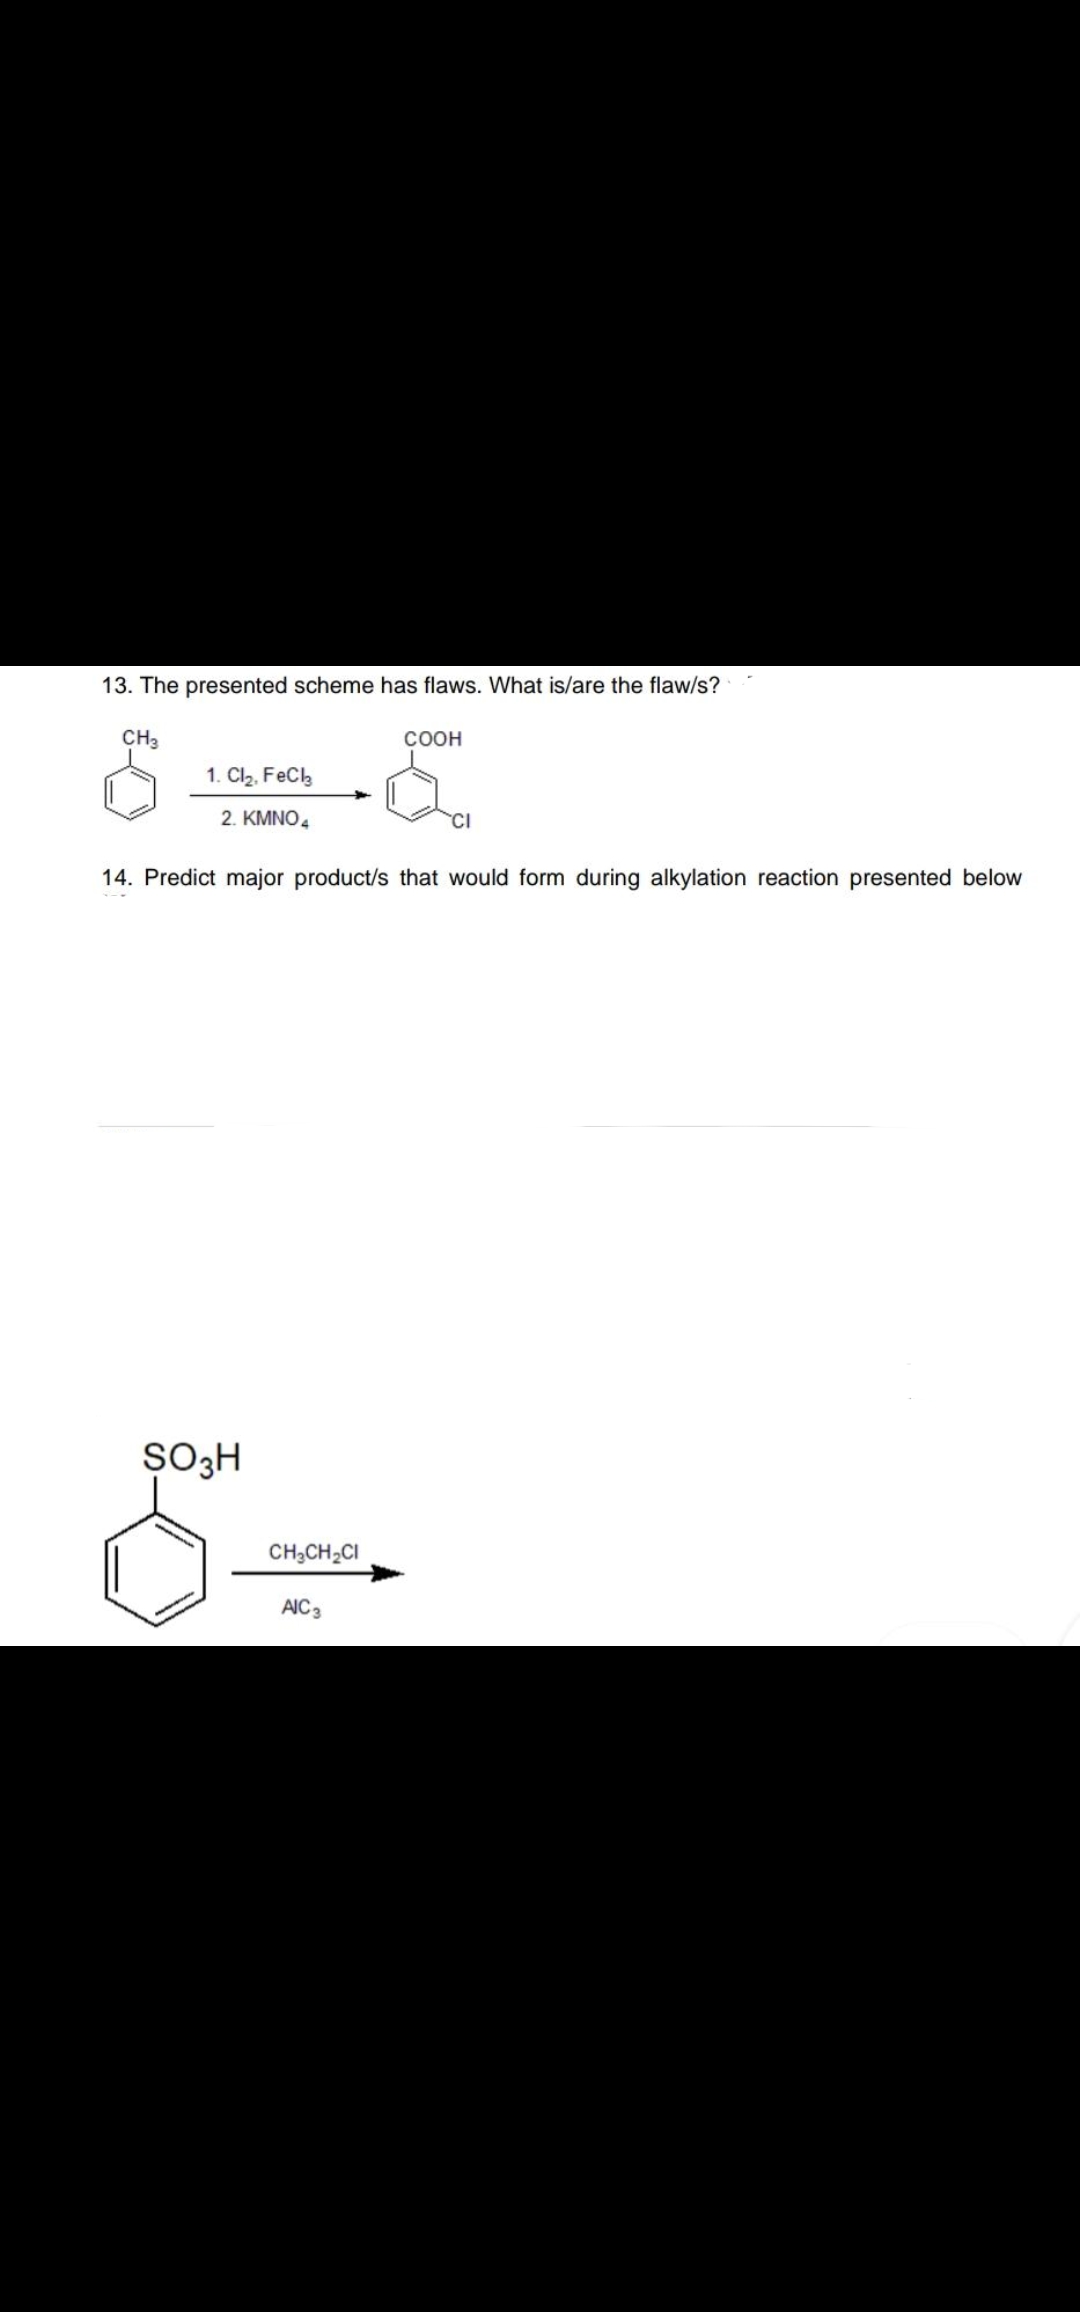 13. The presented scheme has flaws. What is/are the flaw/s?
CH3
соон
1. Cl2, FeCk
2. KMNO,
14. Predict major product/s that would form during alkylation reaction presented below
SO3H
CH;CH;CI
AIC3
